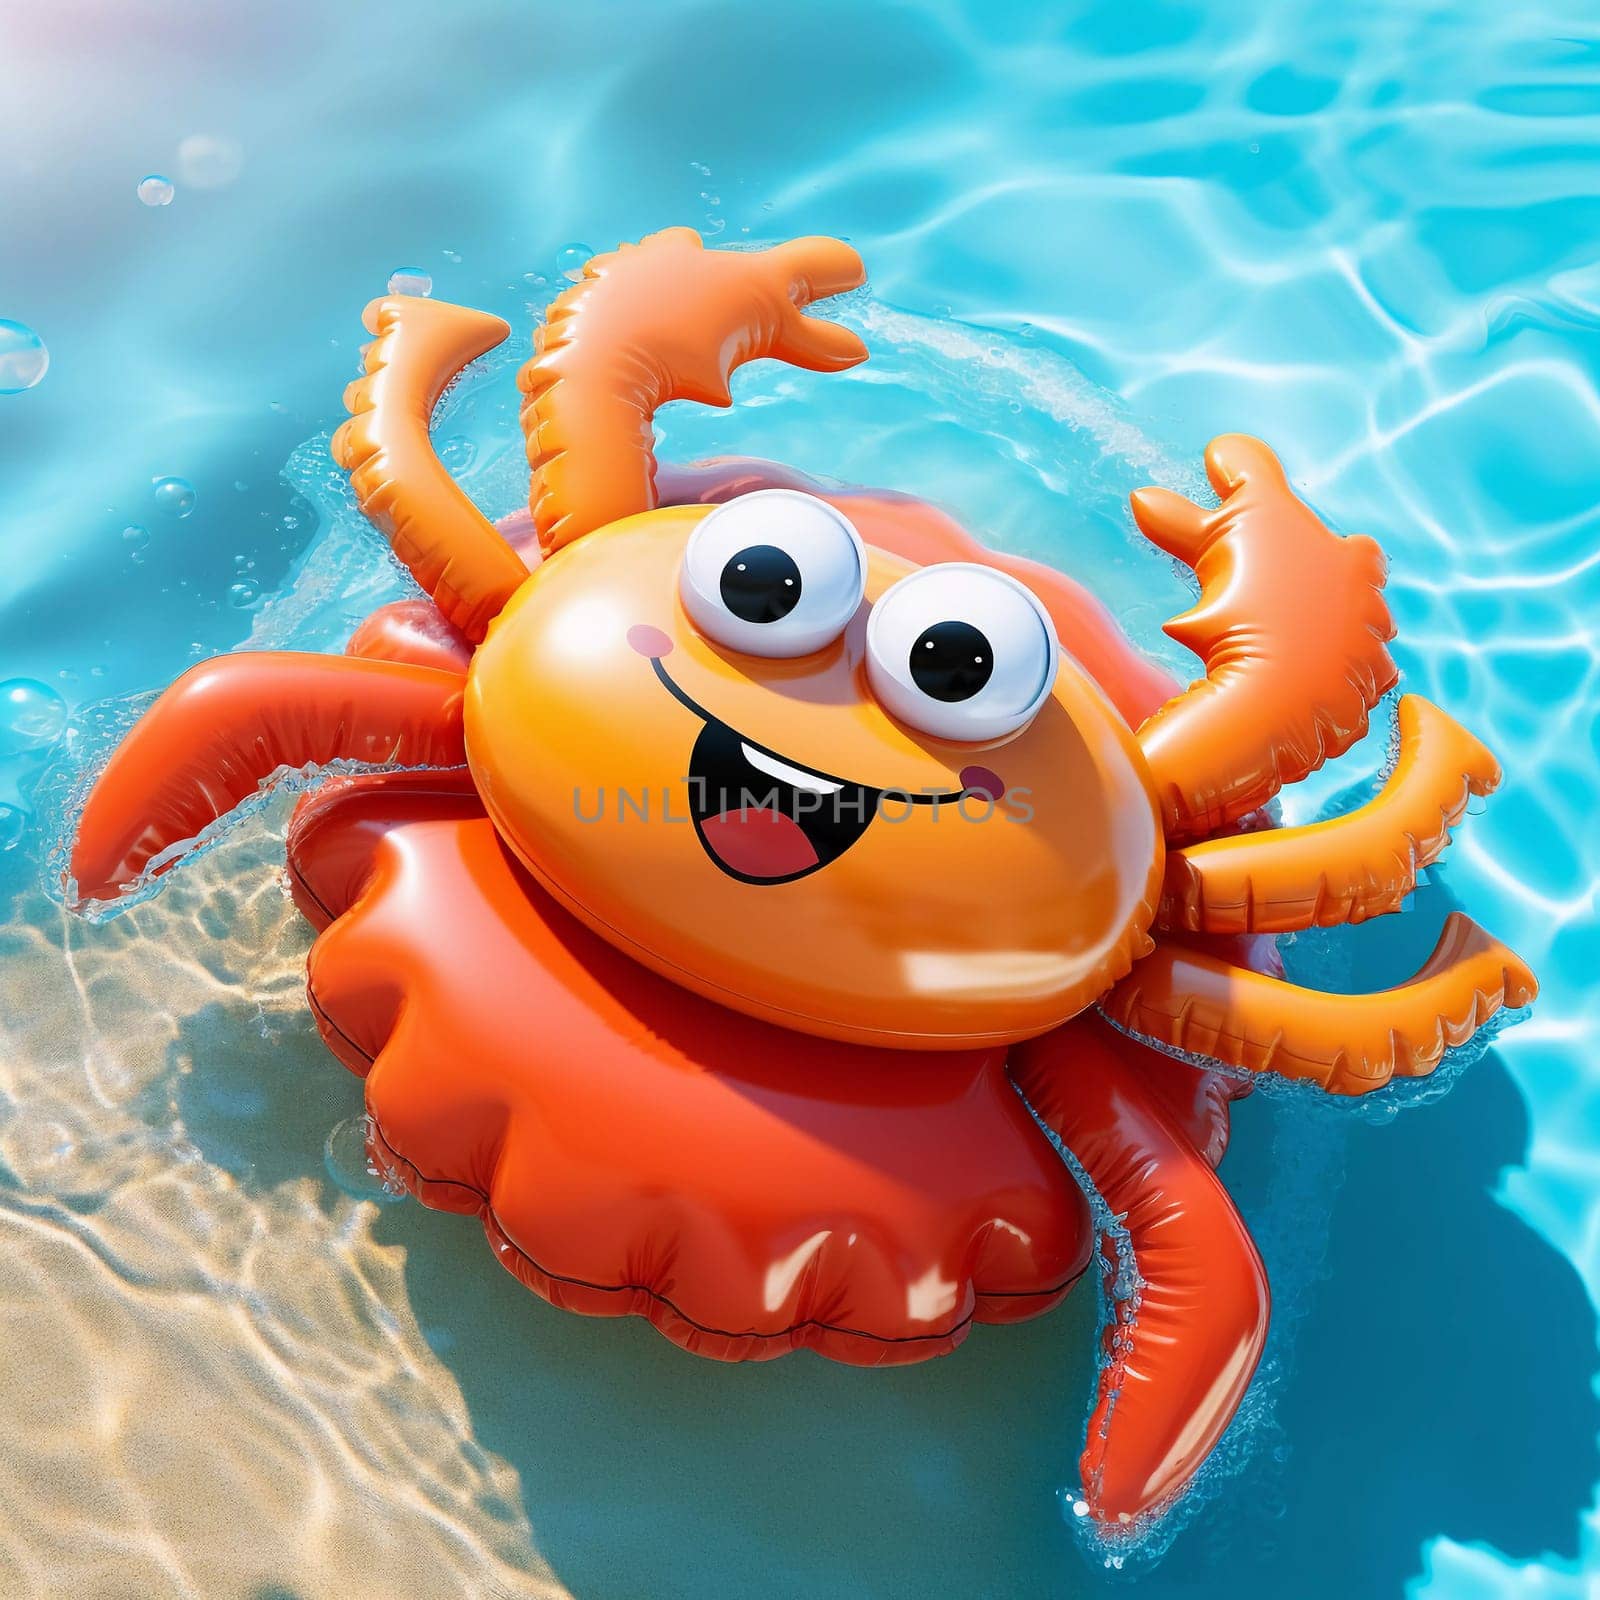 Crab Air Mattress. Floats on the surface of the water in the pool. Summer colorful vacation background.